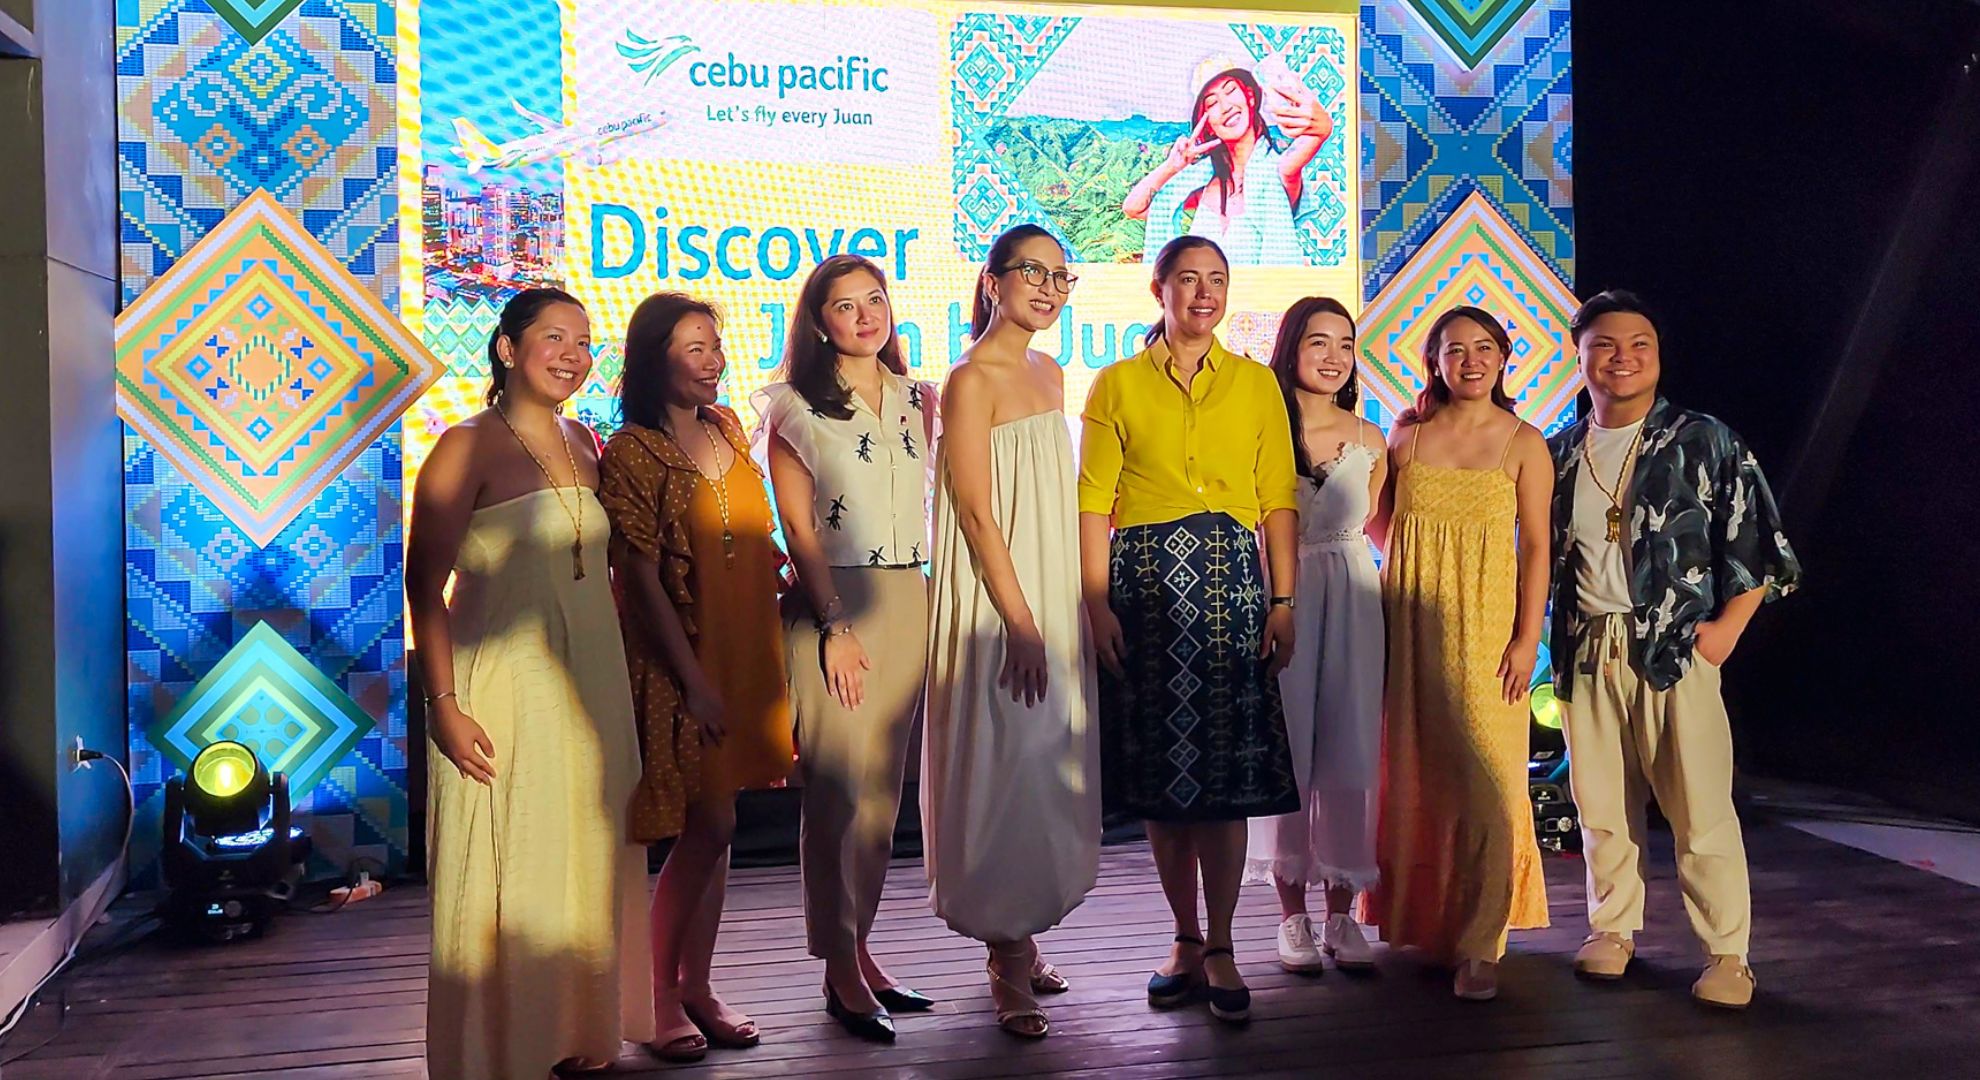 Discover the Philippines 'Juan by Juan' with Cebu Pacific